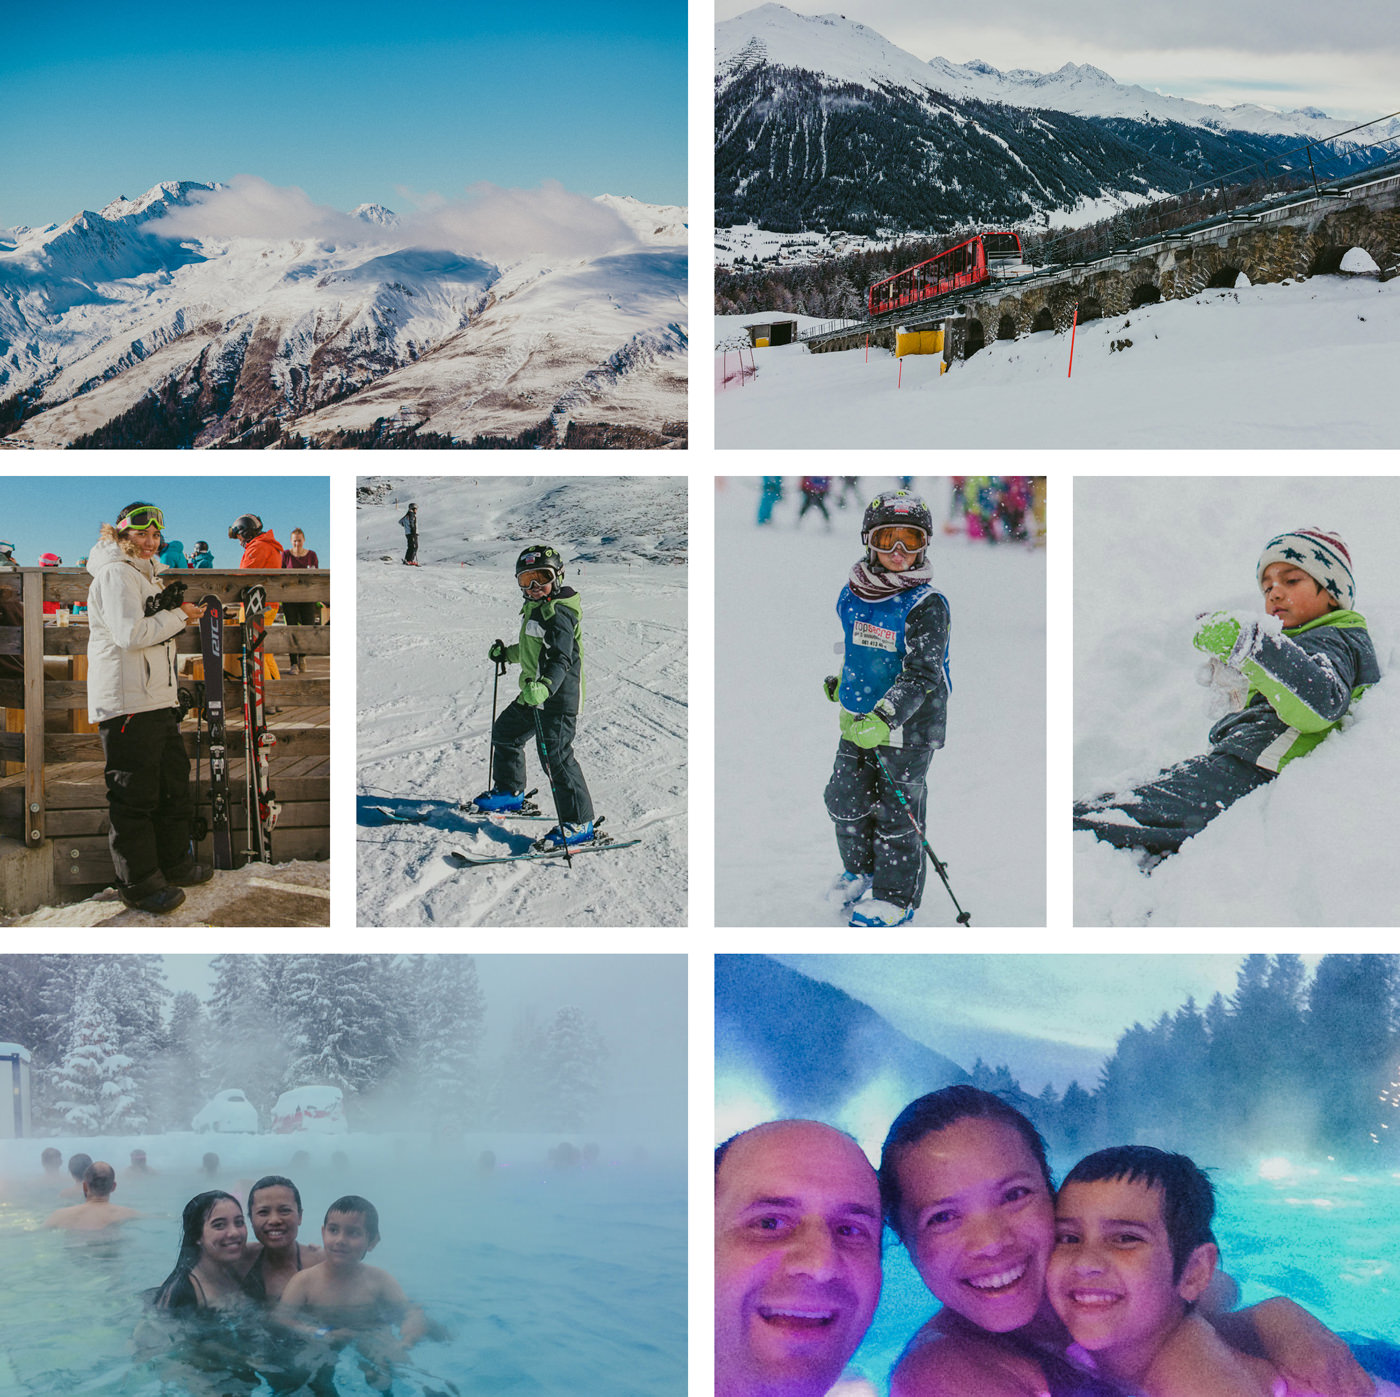 fun in davos - skiing with kids - travel adventures